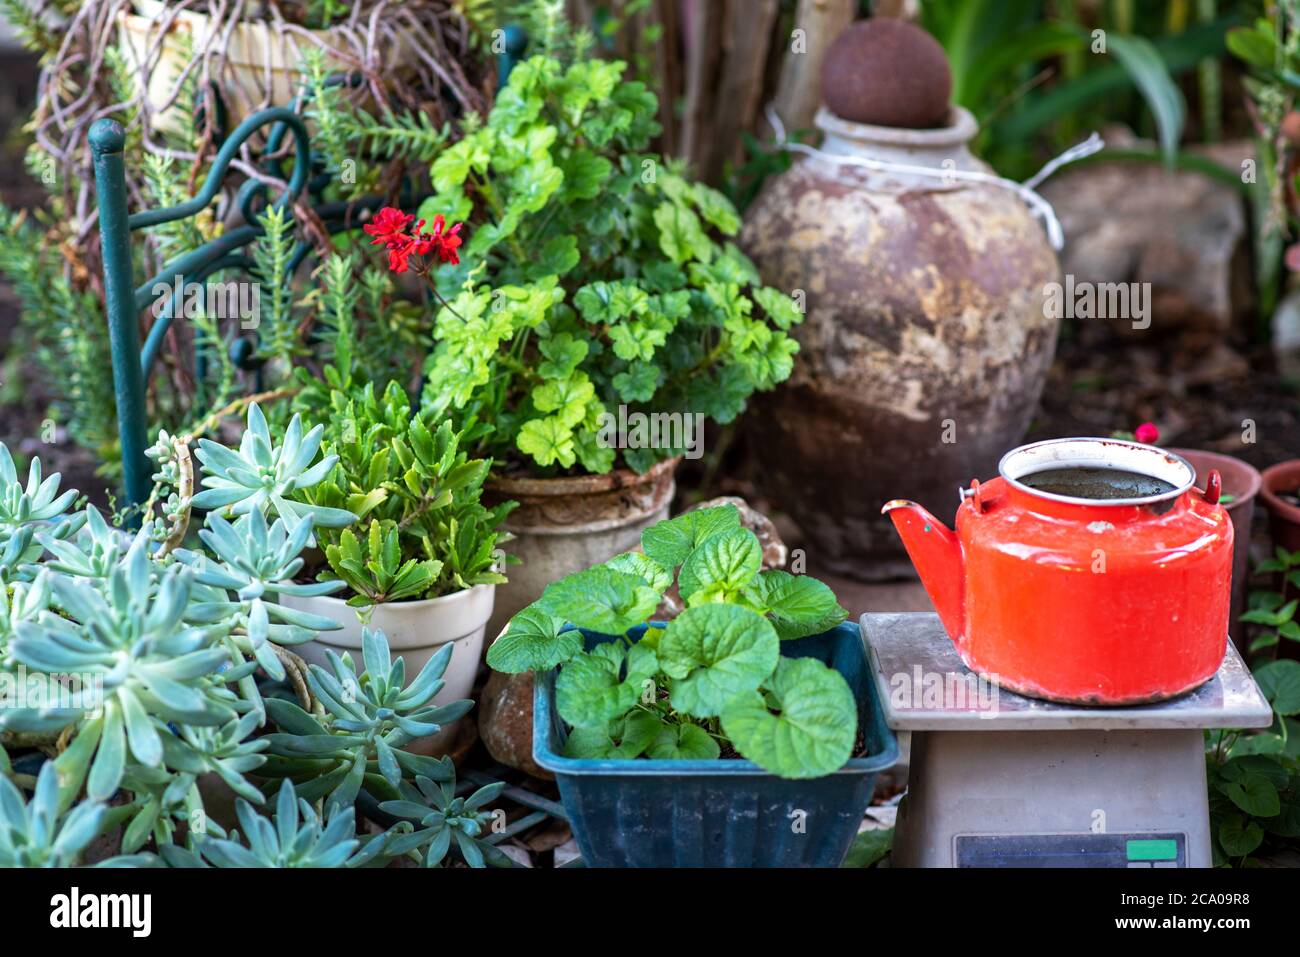 Reduce, reuse, recycle planter craft ideas. Second-hand kettles, saucepans, old vase and basket turn into garden flower pots. Recycled garden design and low-waste lifestyle. Stock Photo